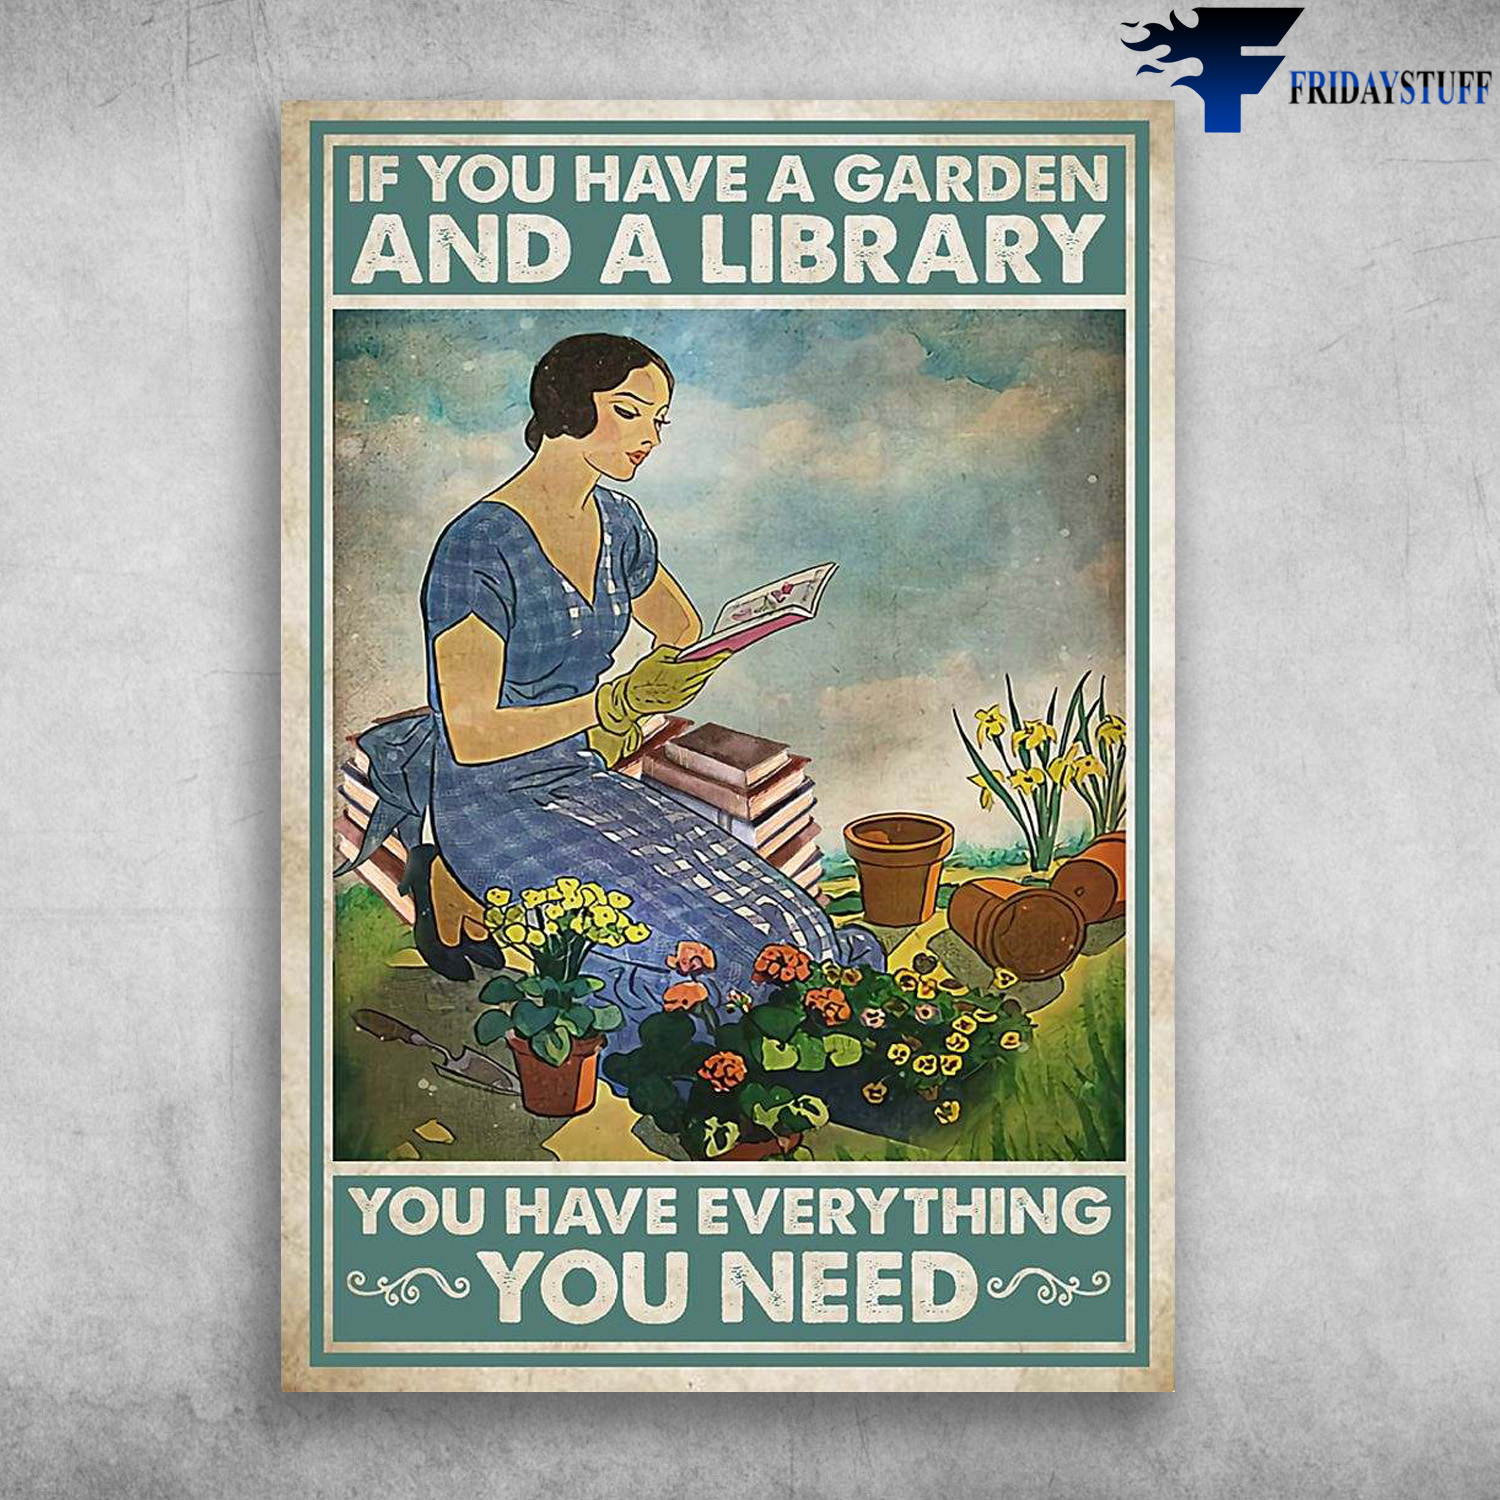 Girl Reading, Book And Garden - If You Have A Garden And Library, You Have Everything You Need